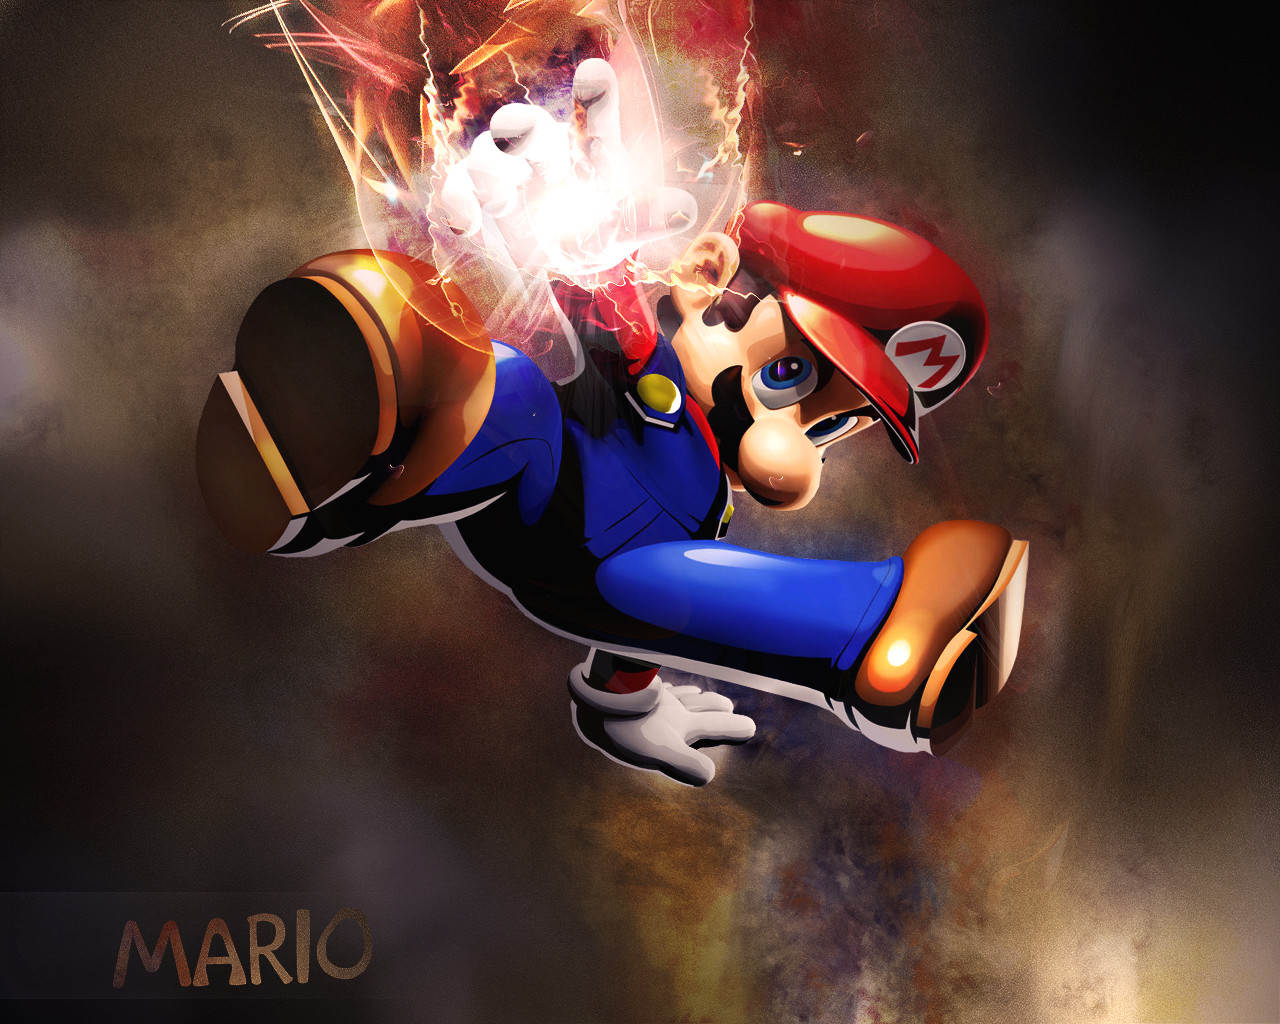 Awesome Super Mario Inspired Wallpaper And Artwork